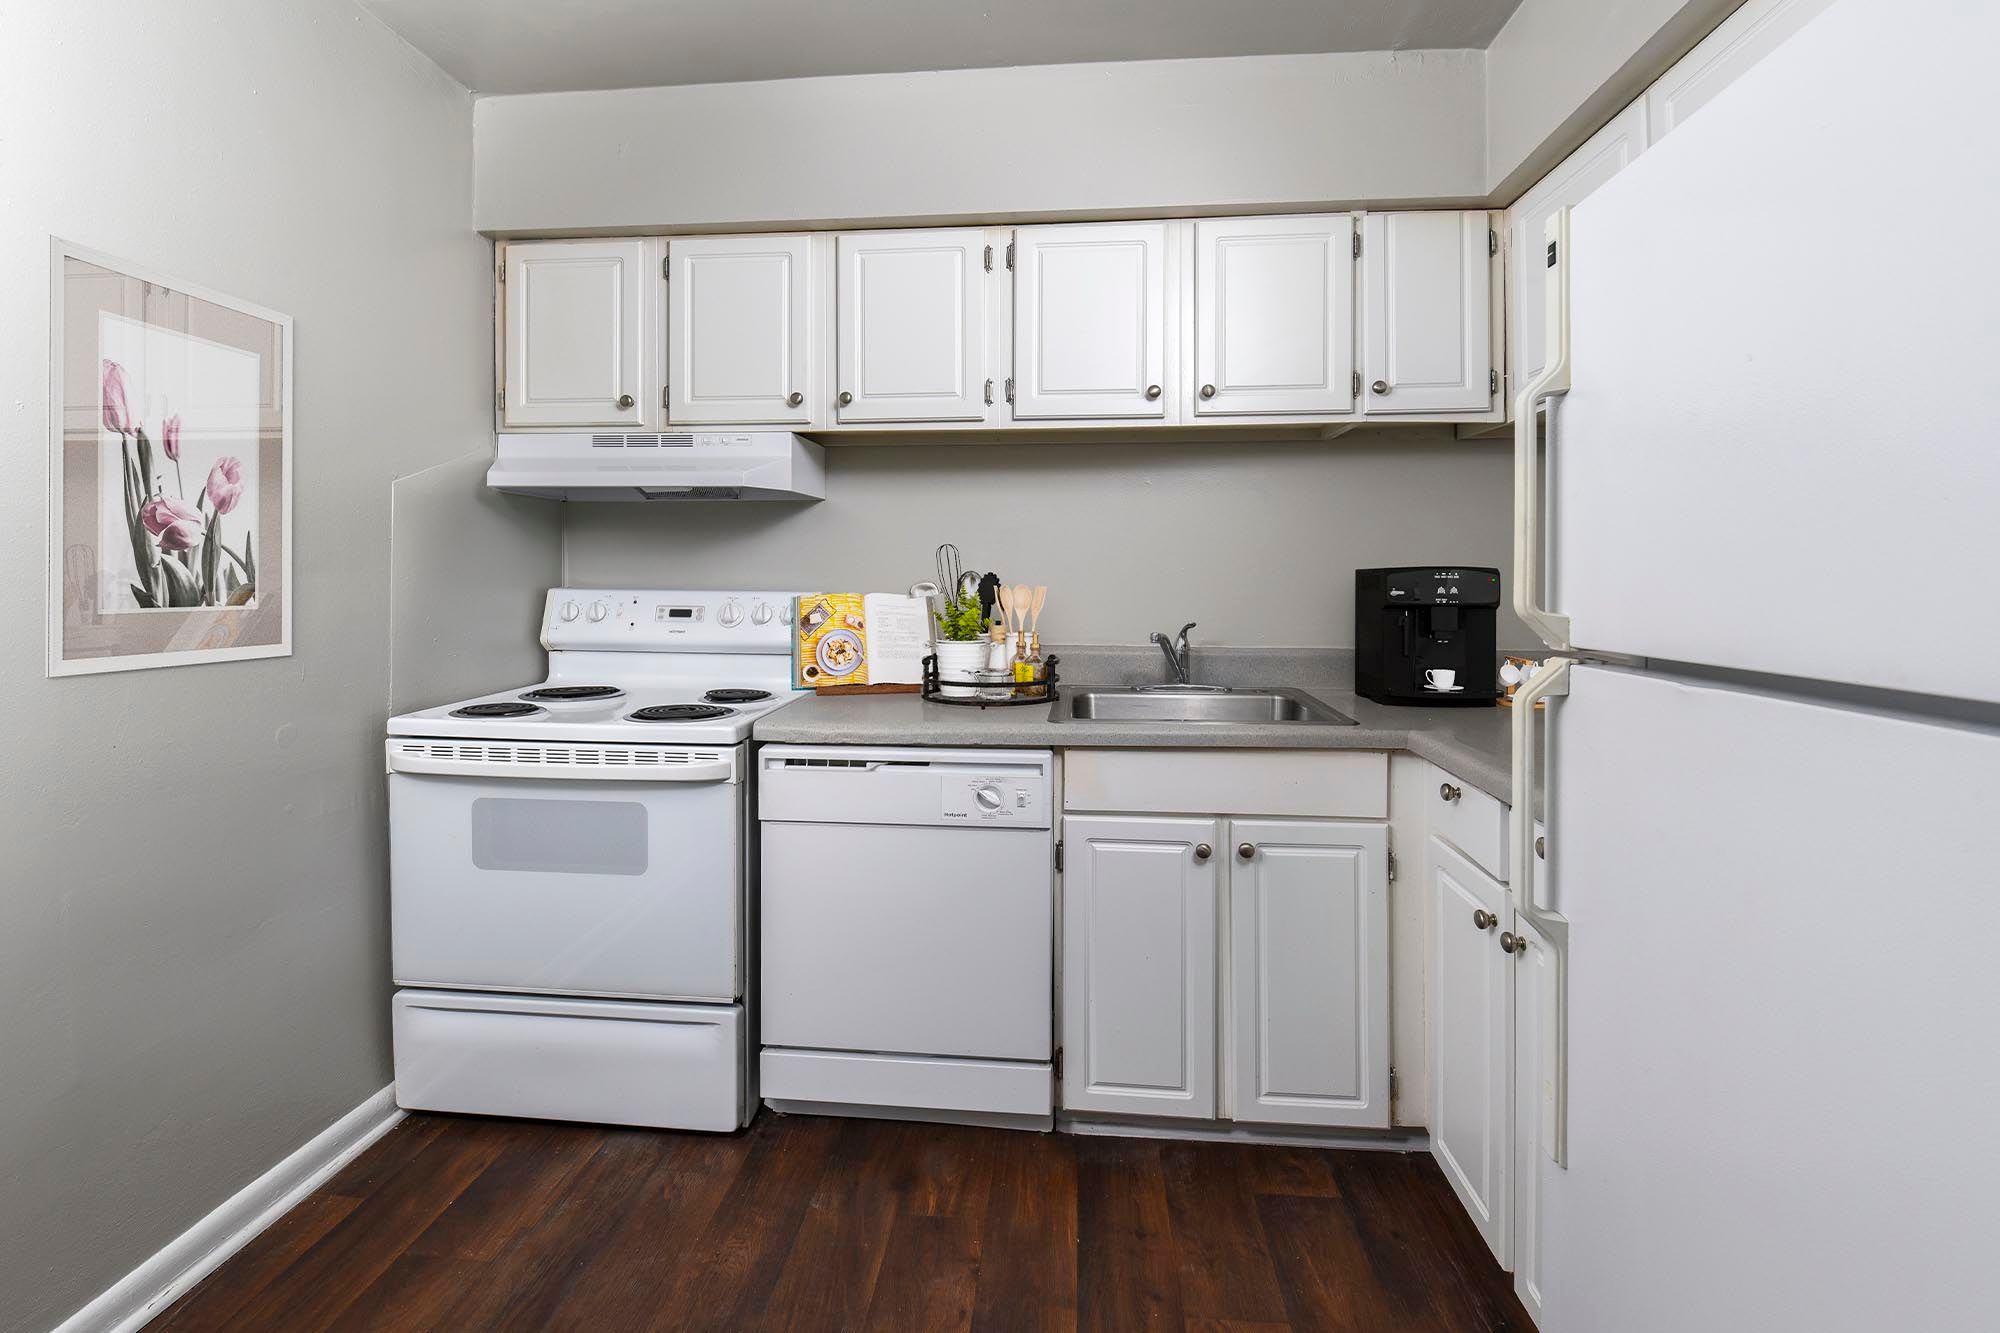 kitchen with white appliance by Chesapeake Pointe in Portsmouth, Virginia